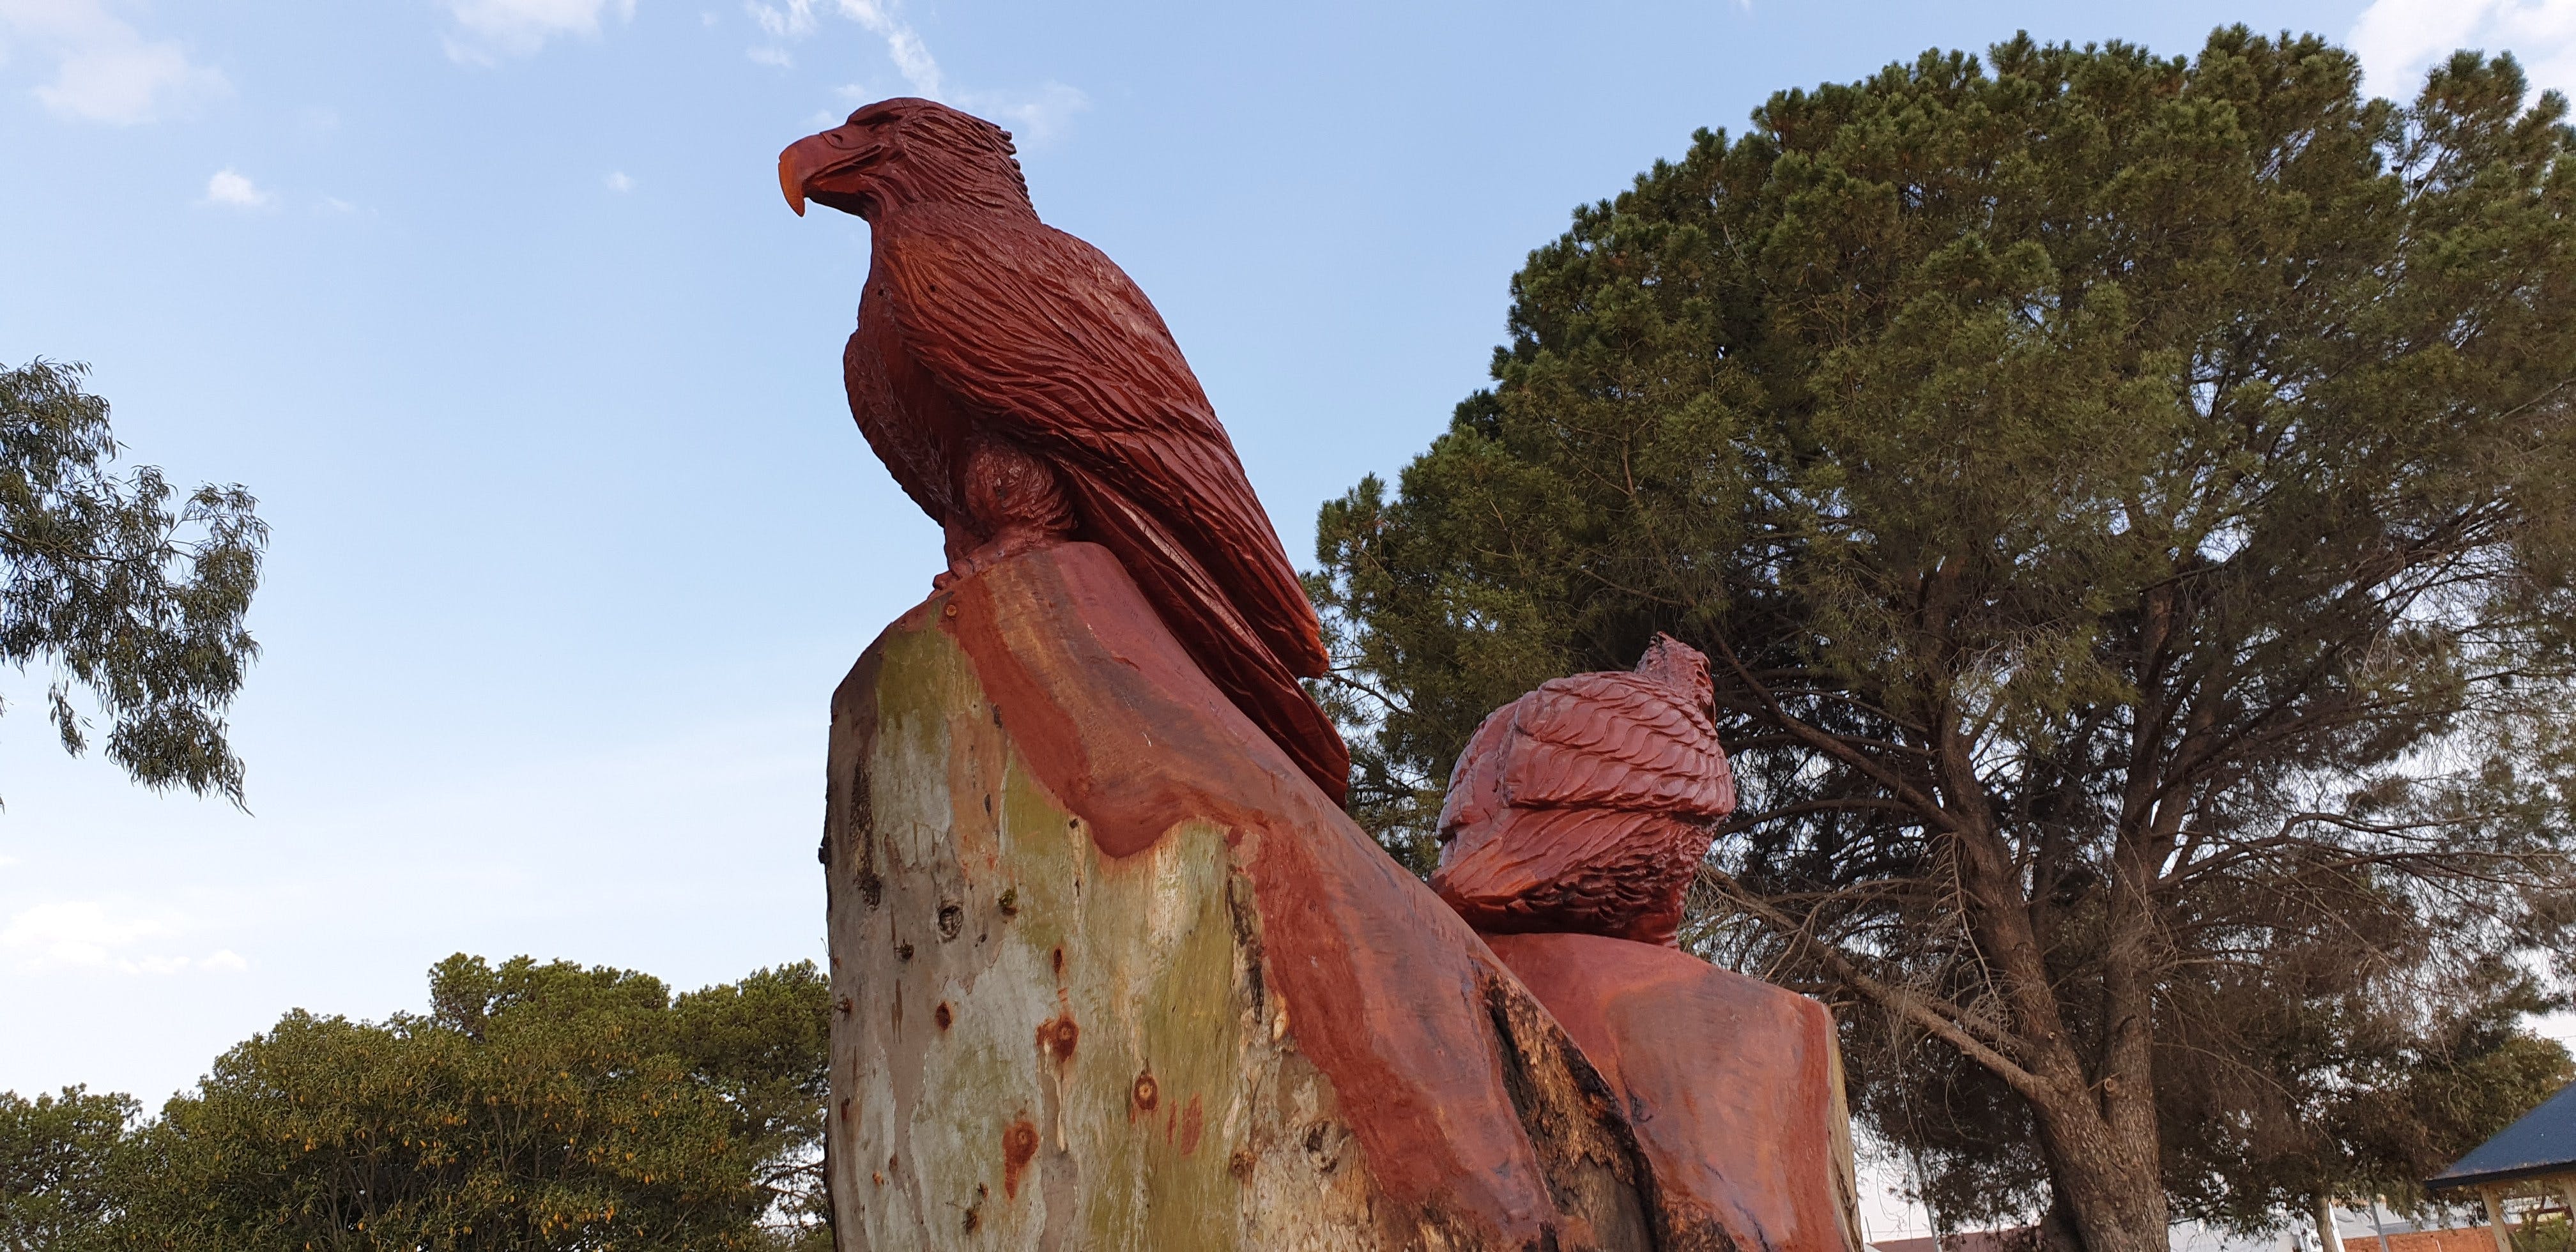 Chainsaw Tree Sculpture - Attractions Melbourne